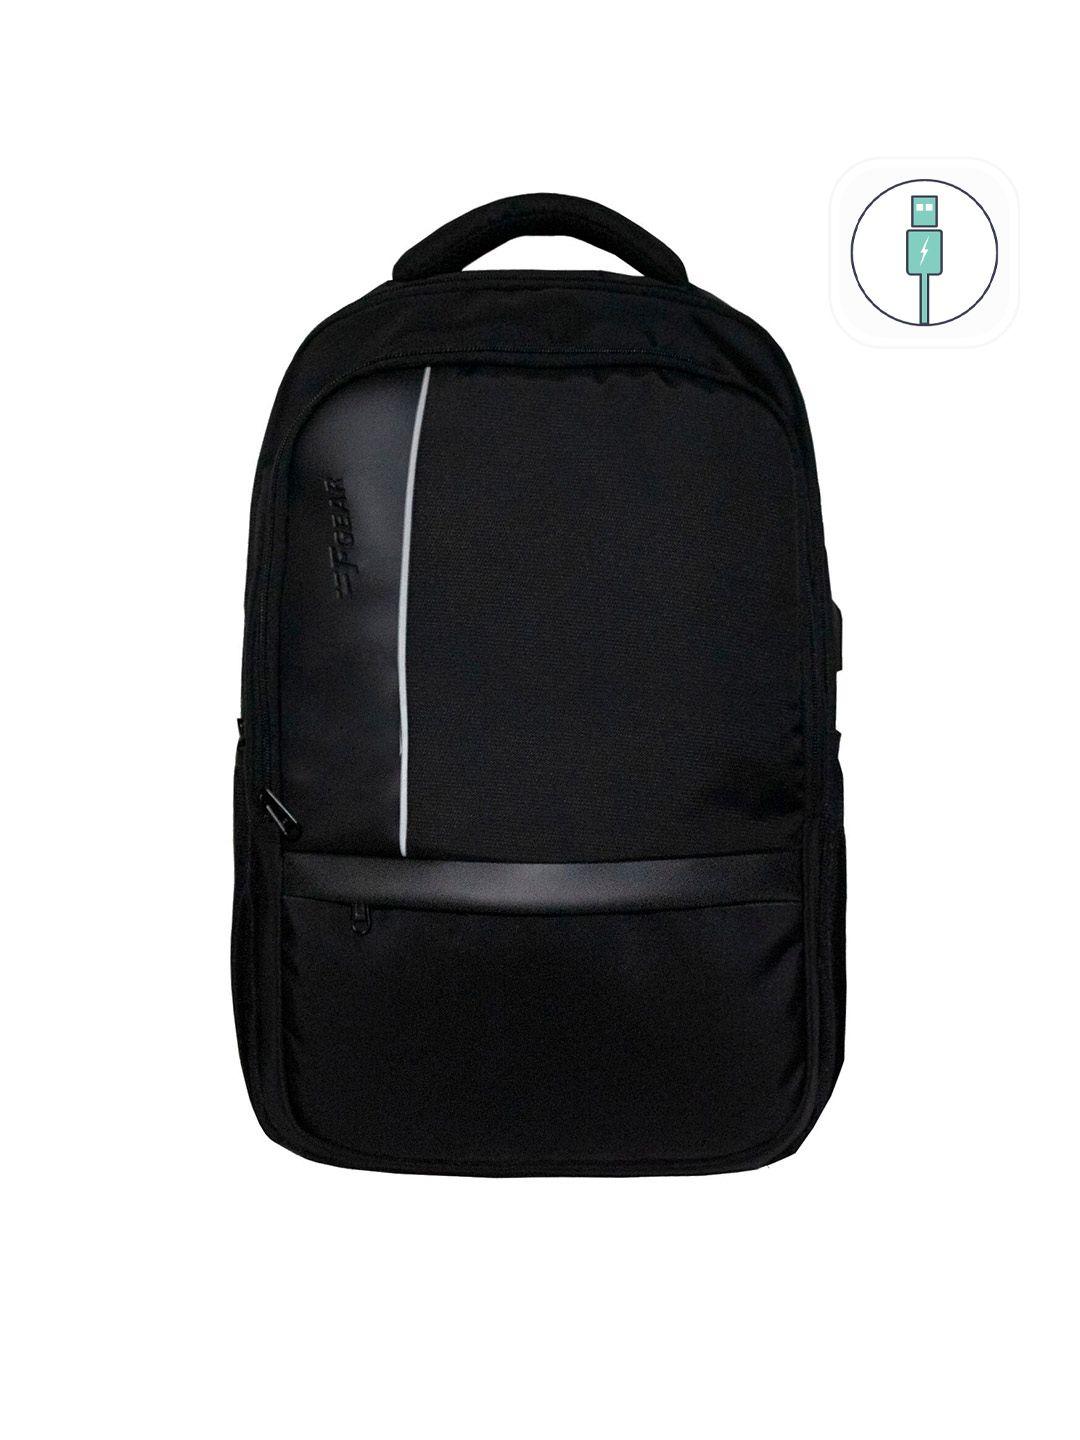 f gear unisex black backpack with usb charging port